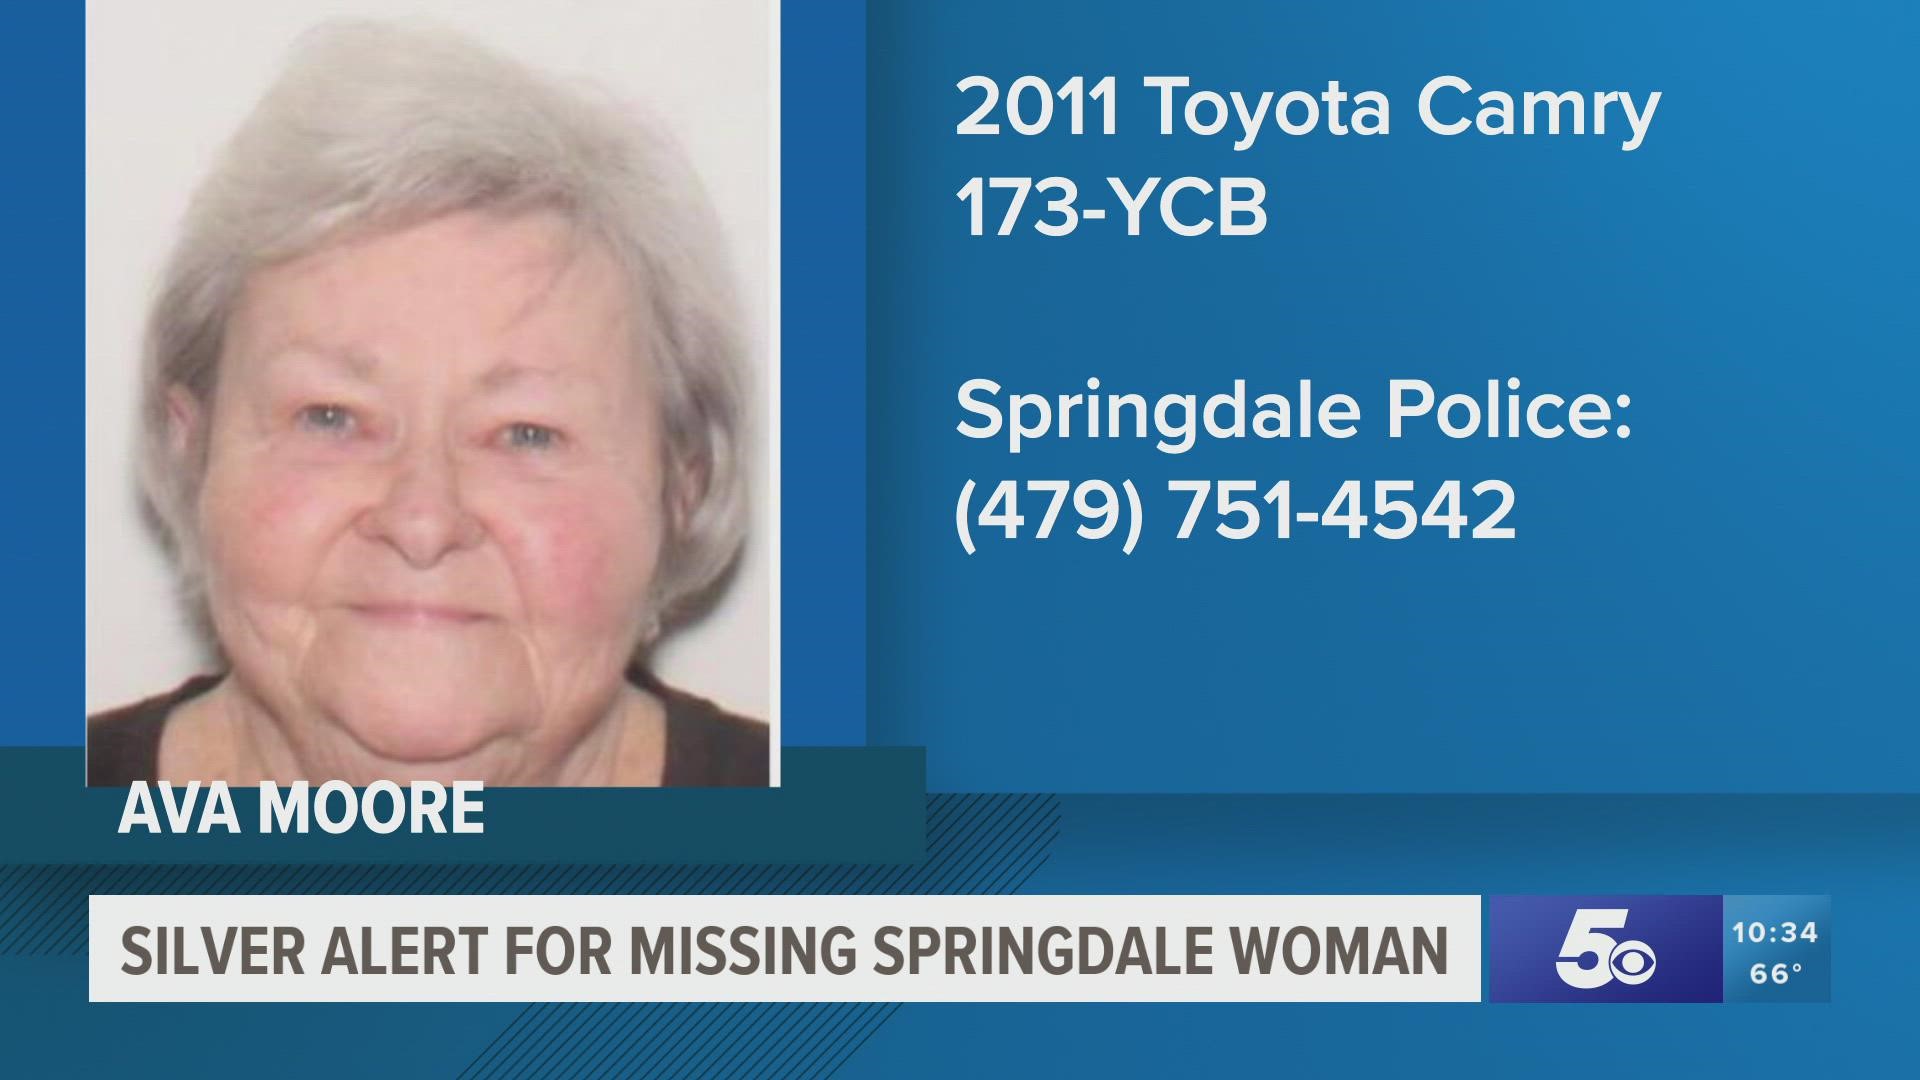 Springdale Police are looking for Ava Moore, 82, who has been missing since Thursday morning, Oct. 21.